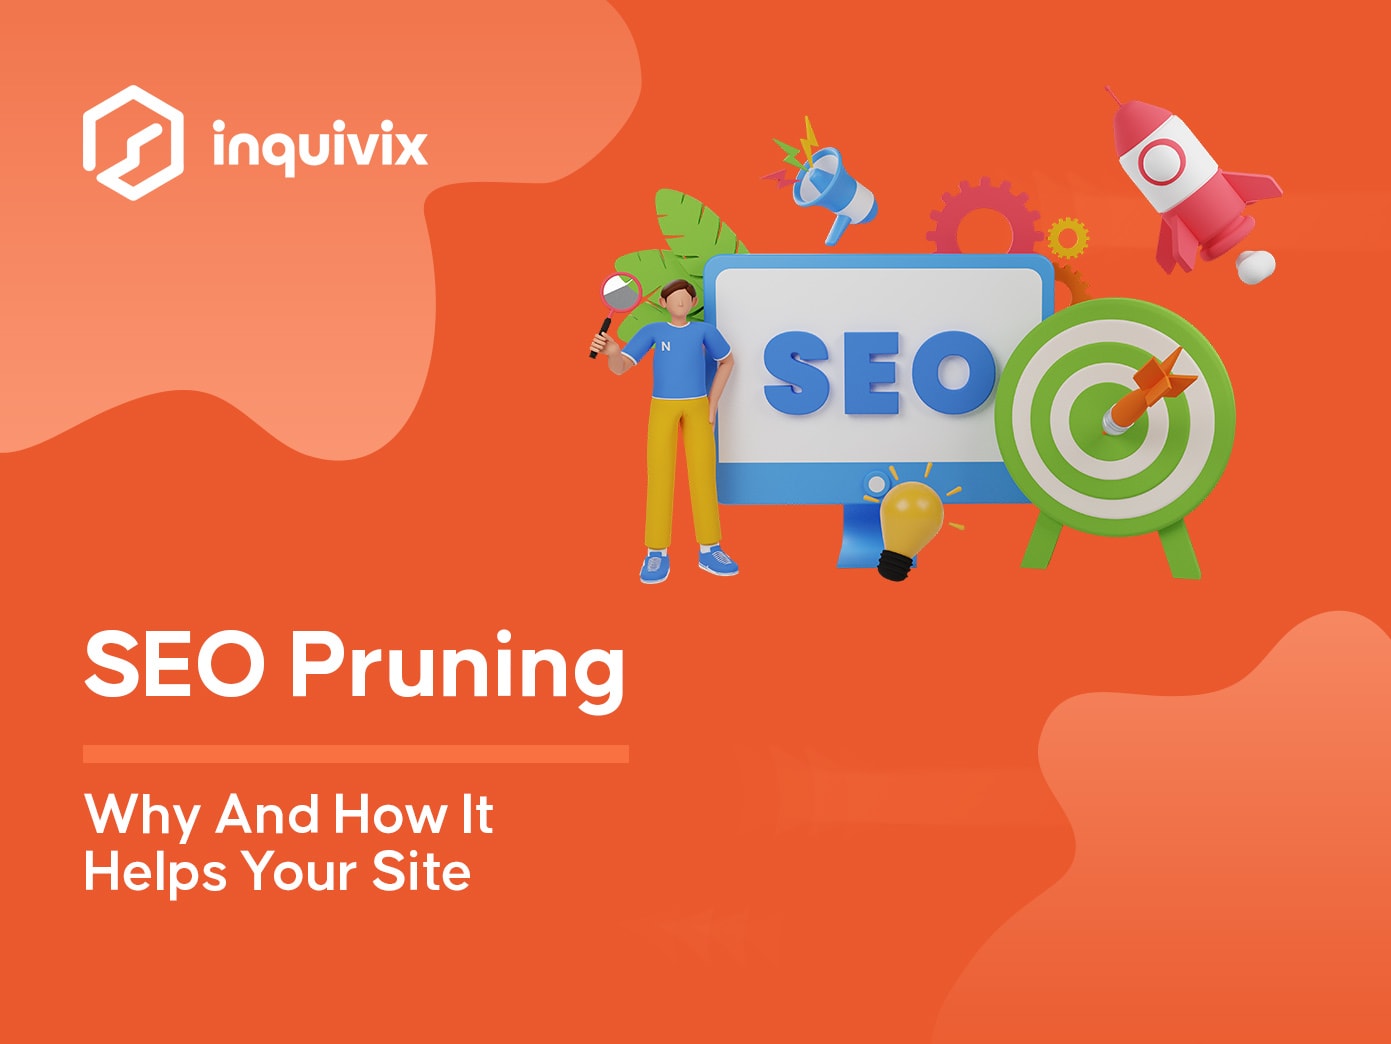 SEO Pruning – Why And How It Helps Your Site